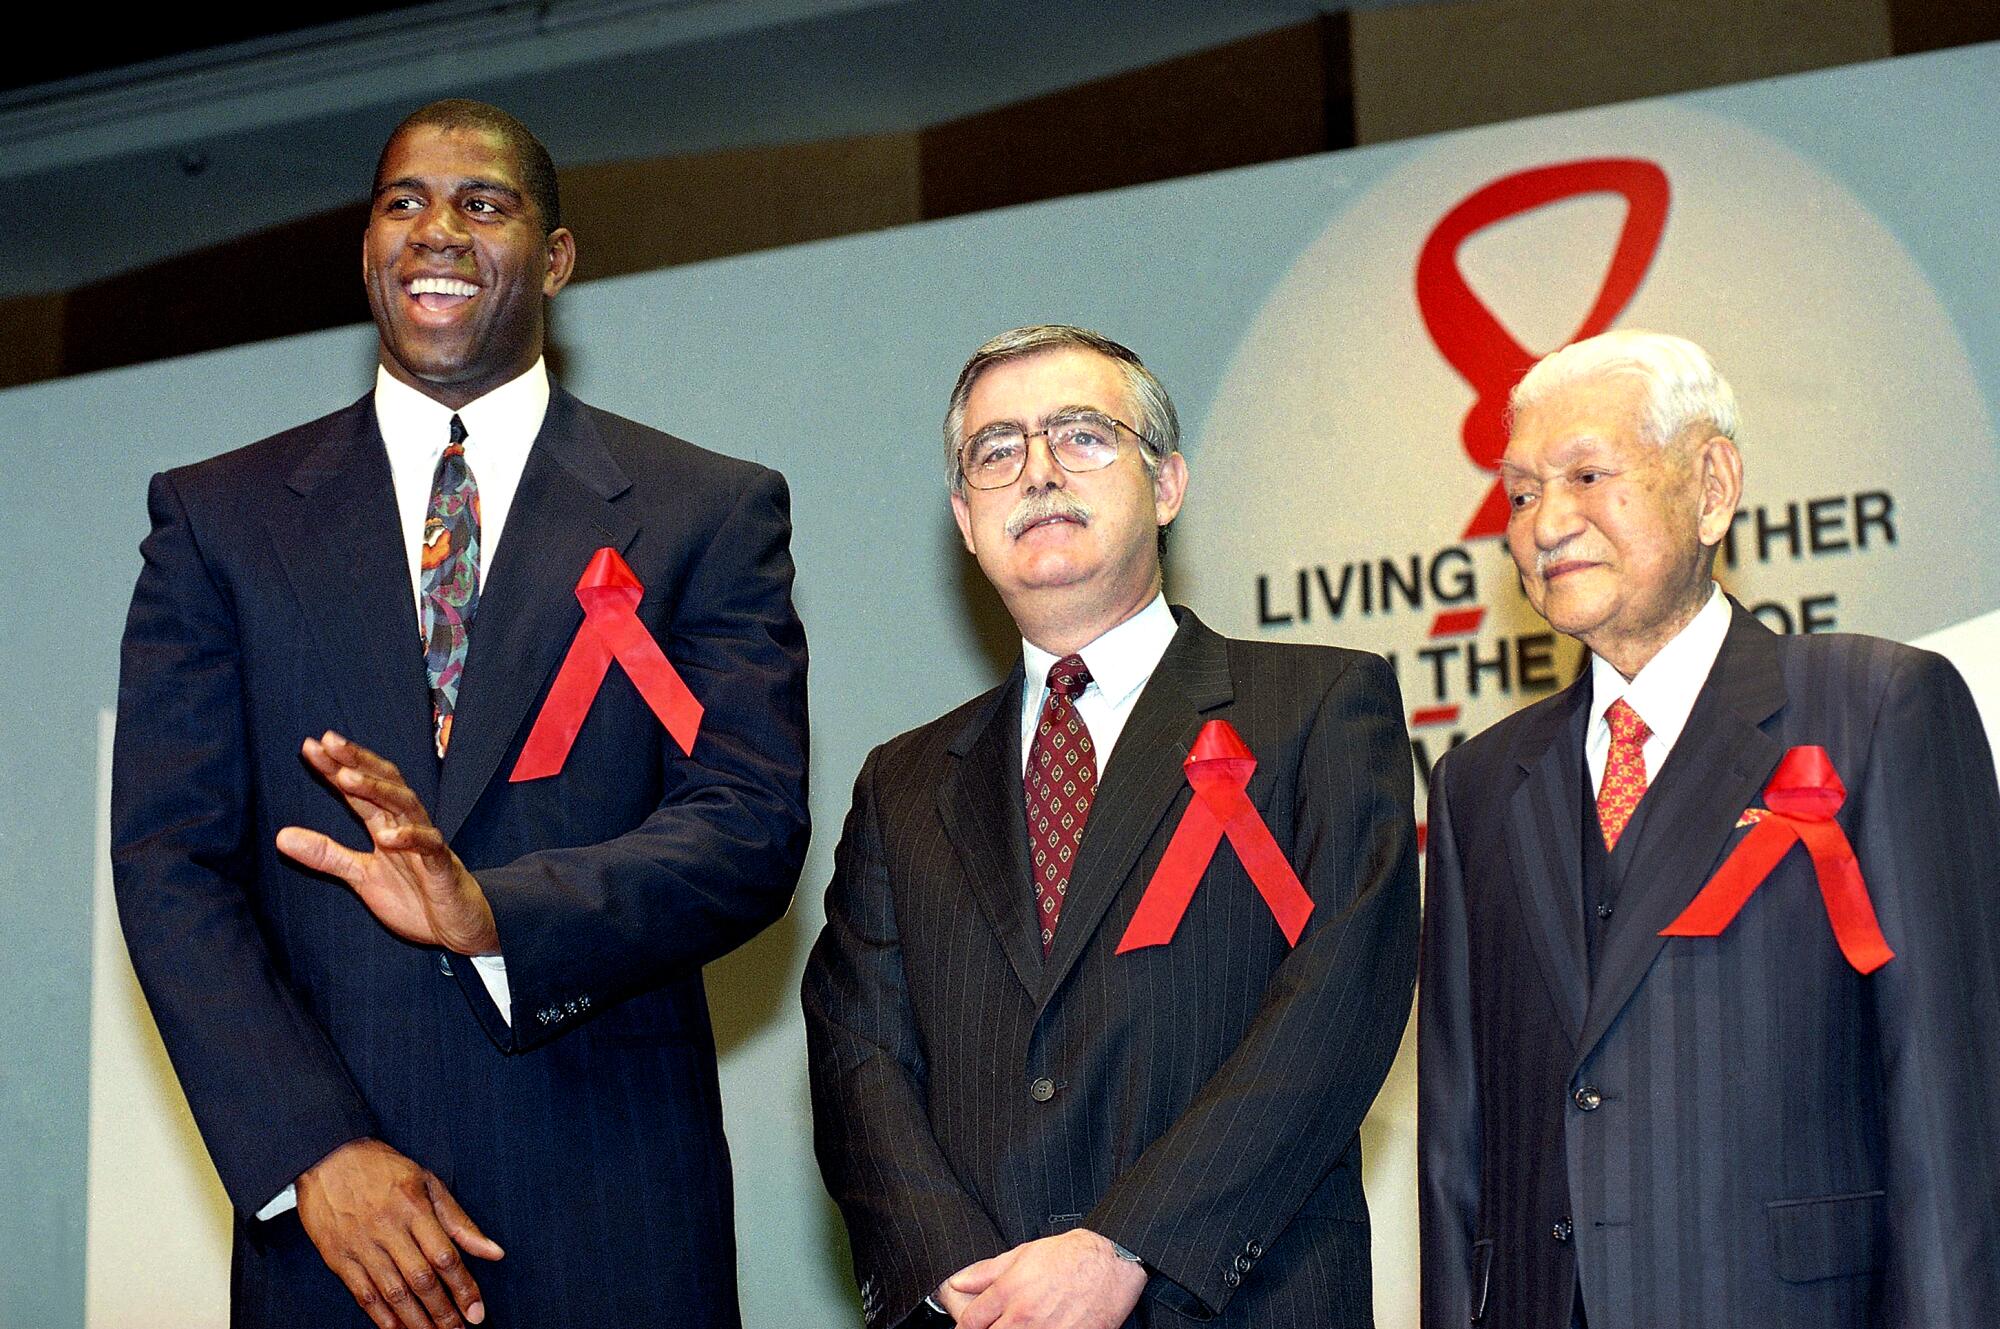 Magic Johnson, Michael Merson and Ryoichi Sasagawa wear oversize red ribbons on their suit jackets